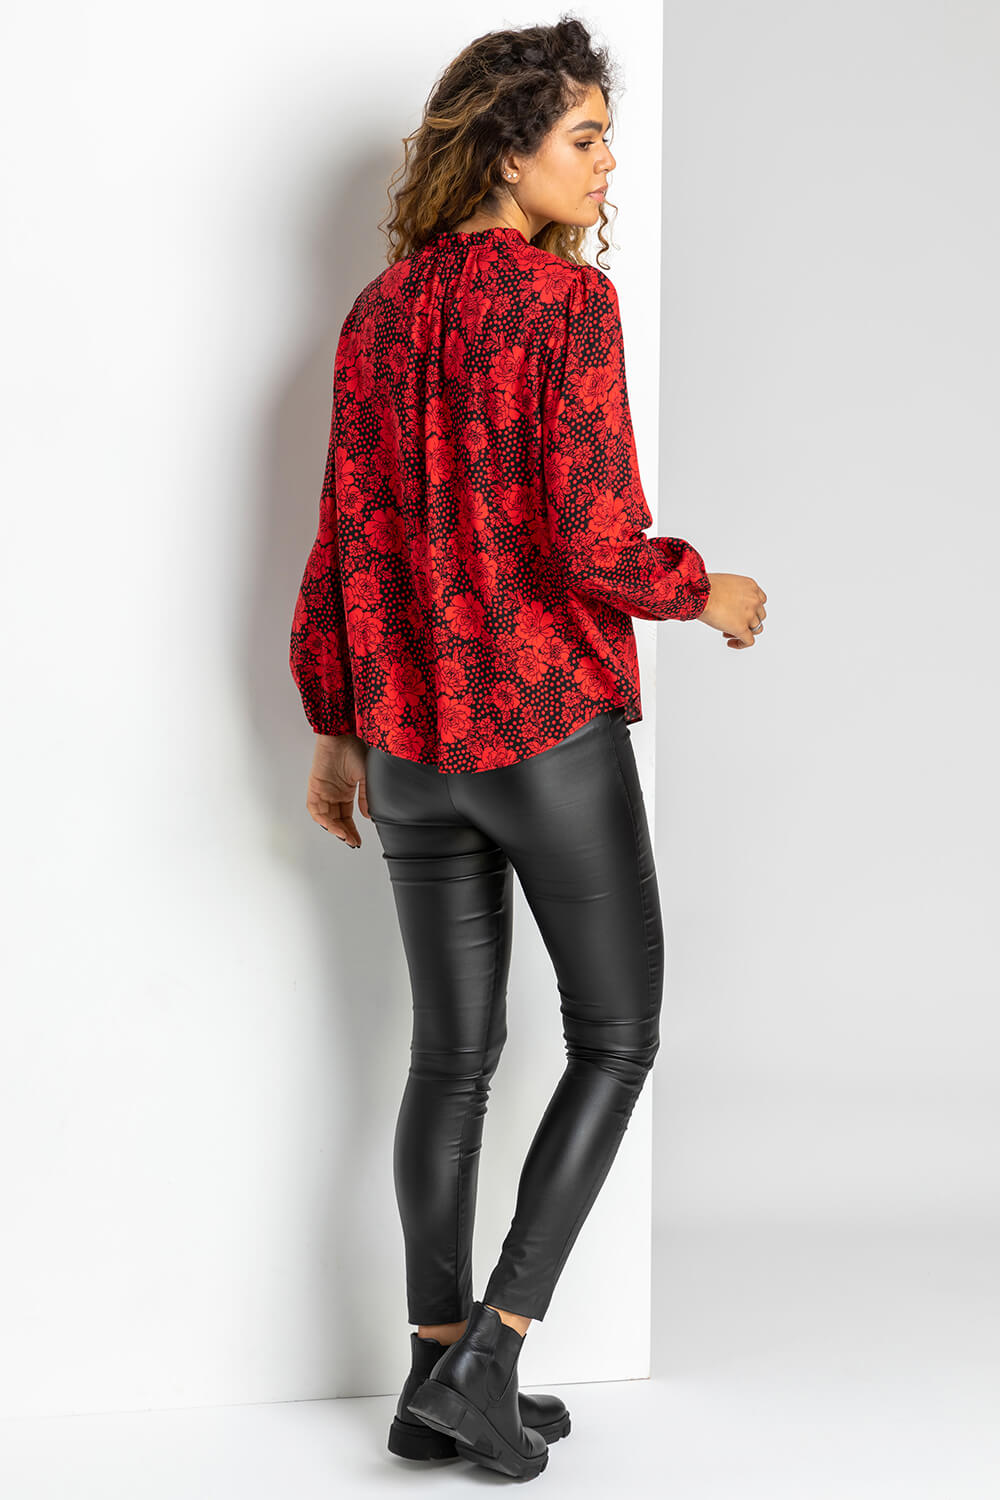 Red Floral Spot Tie Neck Blouse, Image 2 of 5